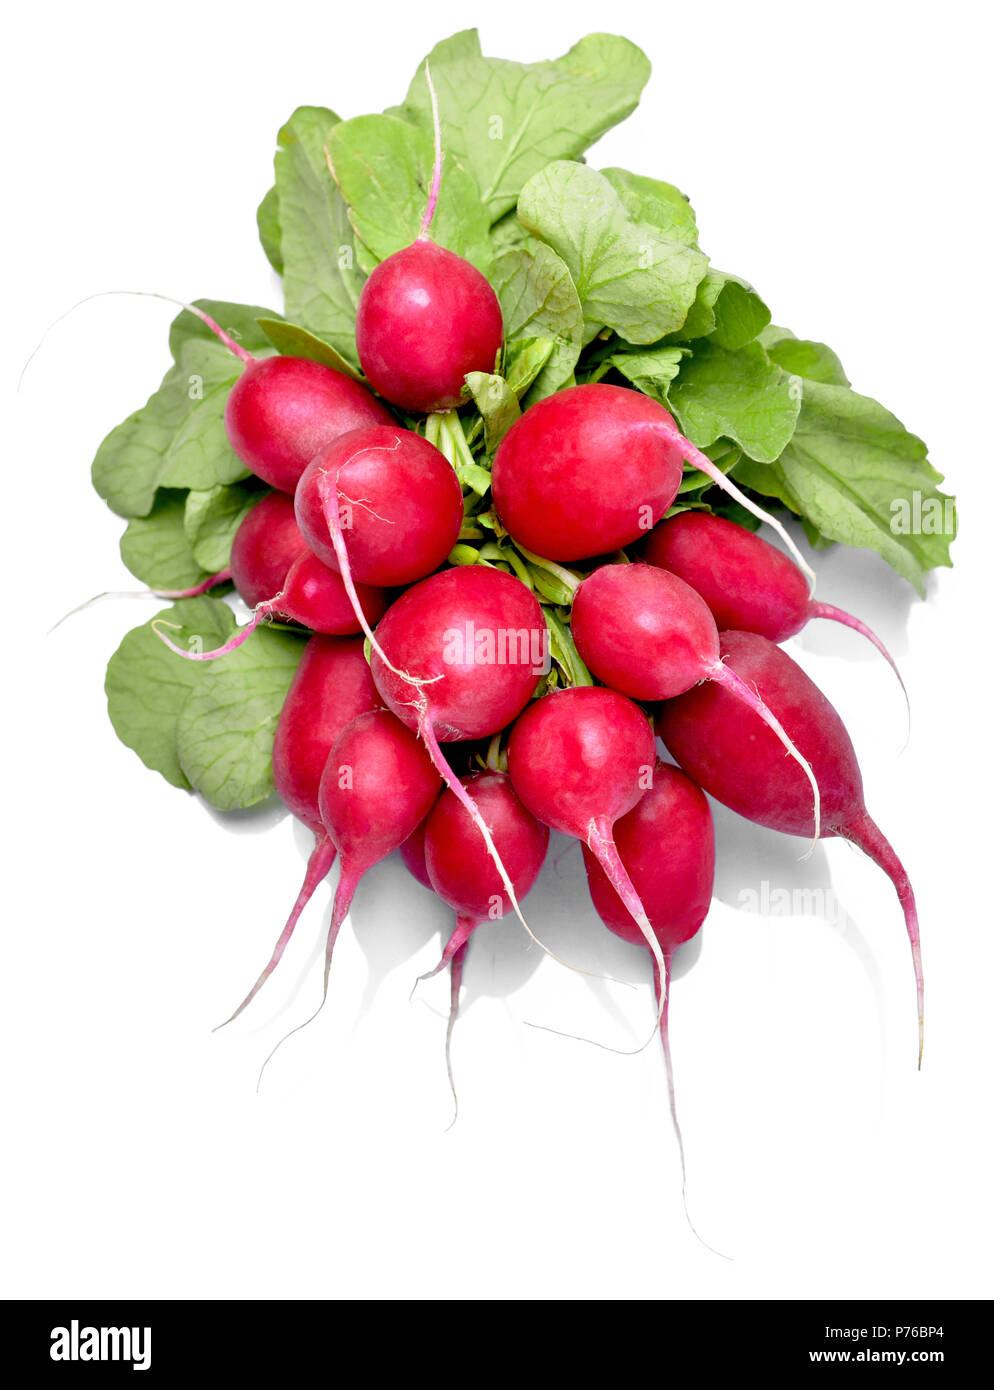 Ripe radish bundle, isolated on white background. Red or pink radish with green leaves, salad vegetables. Stock Photo